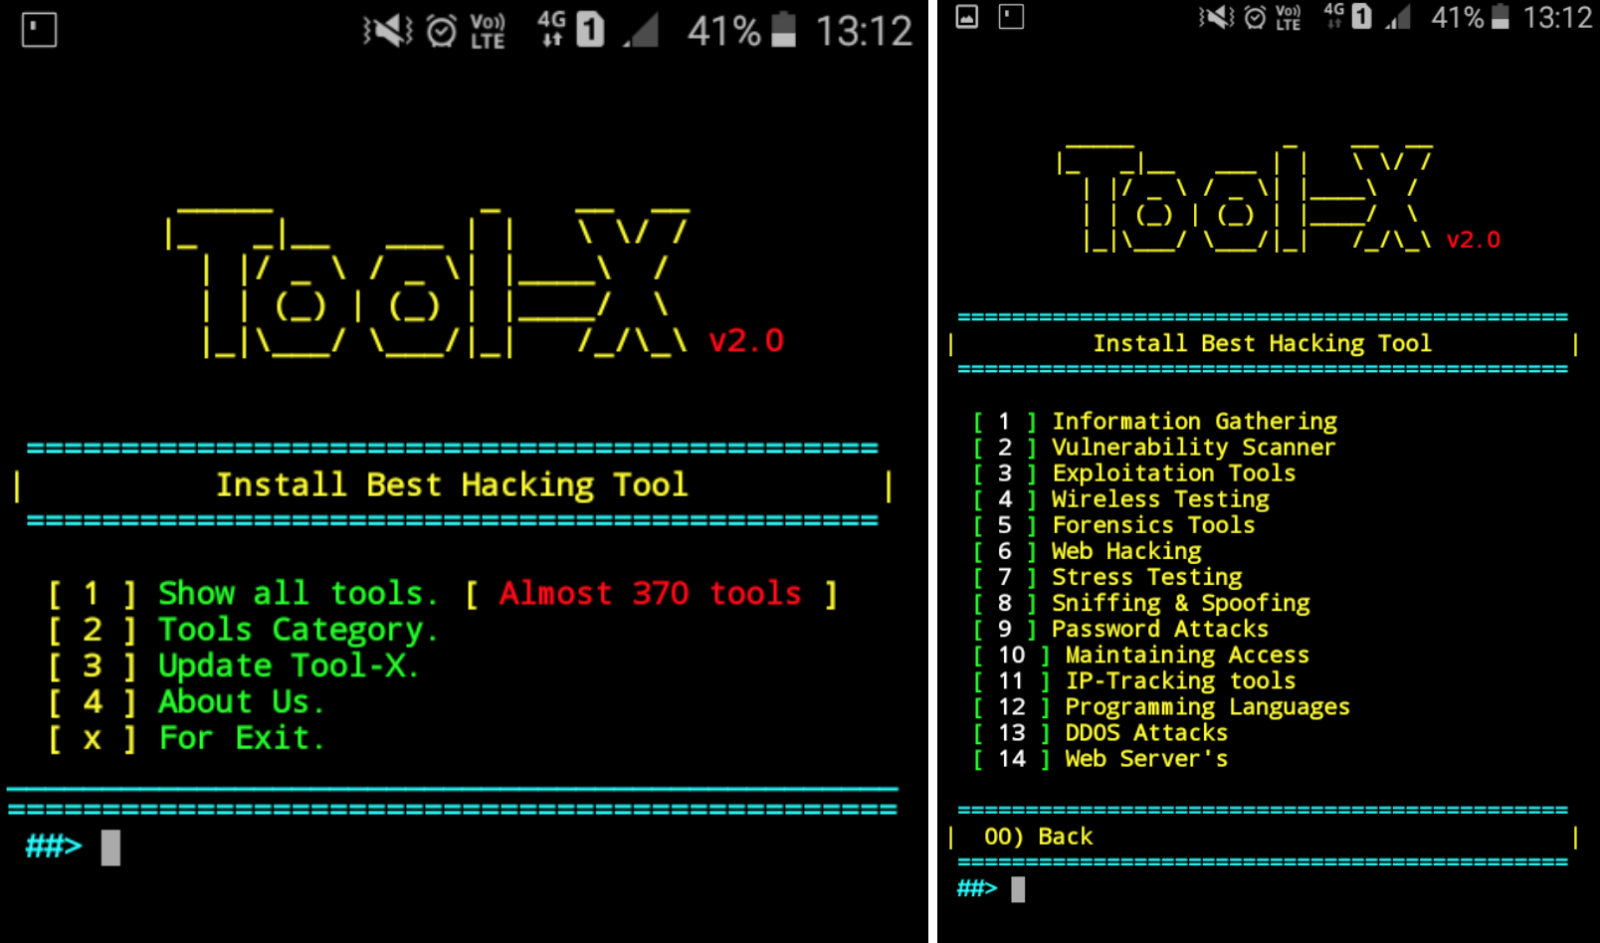 Tool-X is a Kali Linux hacking tool - Penetration Testing Tools, ML and